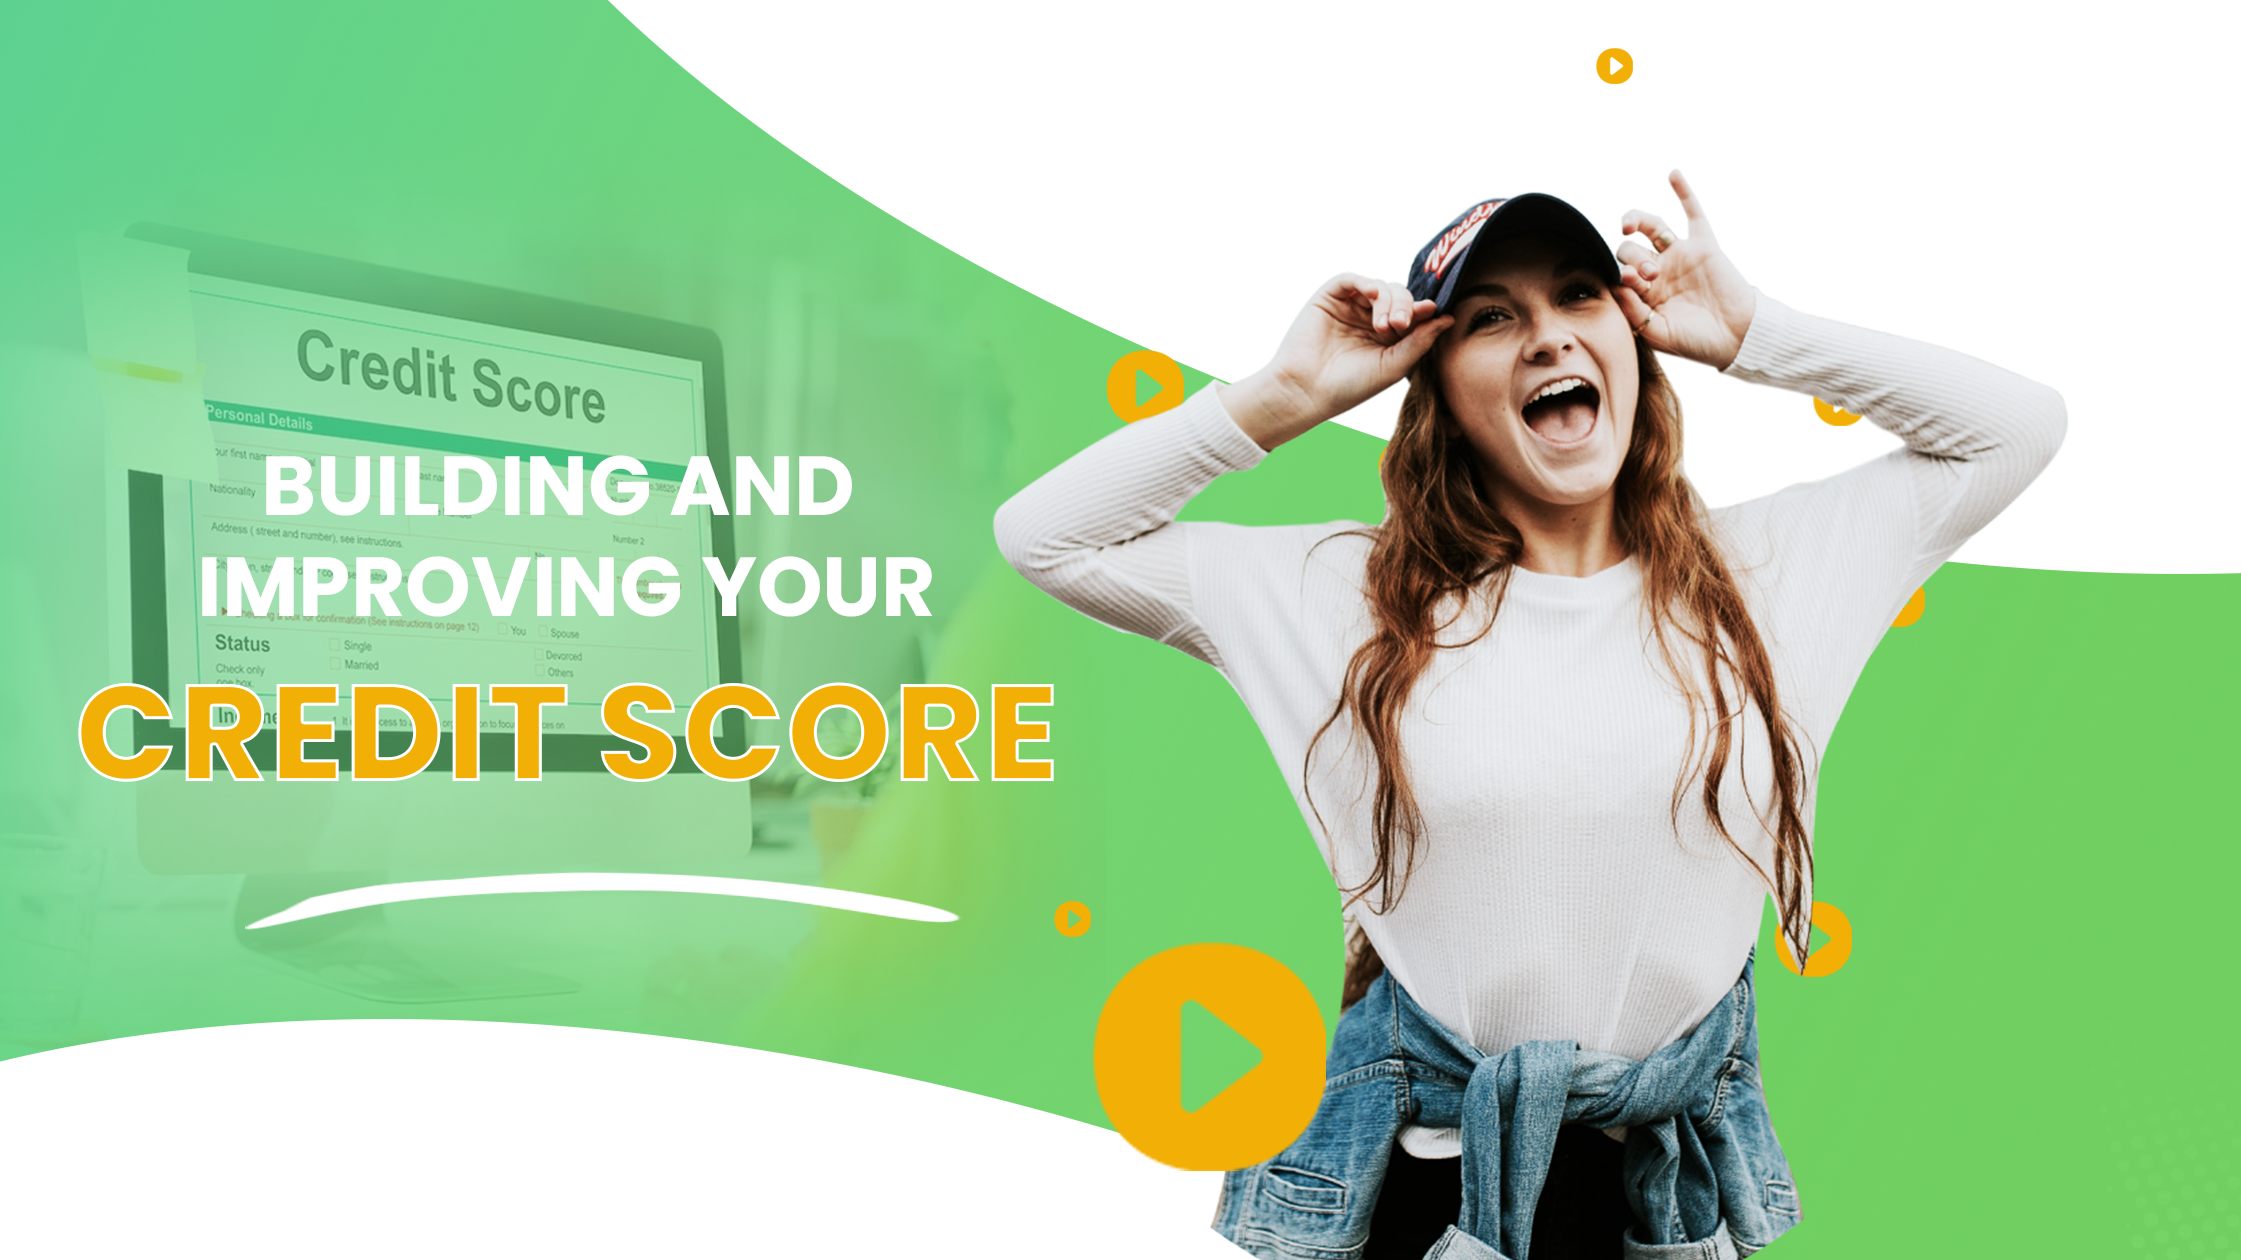 5 tips to build and improve your credit score!